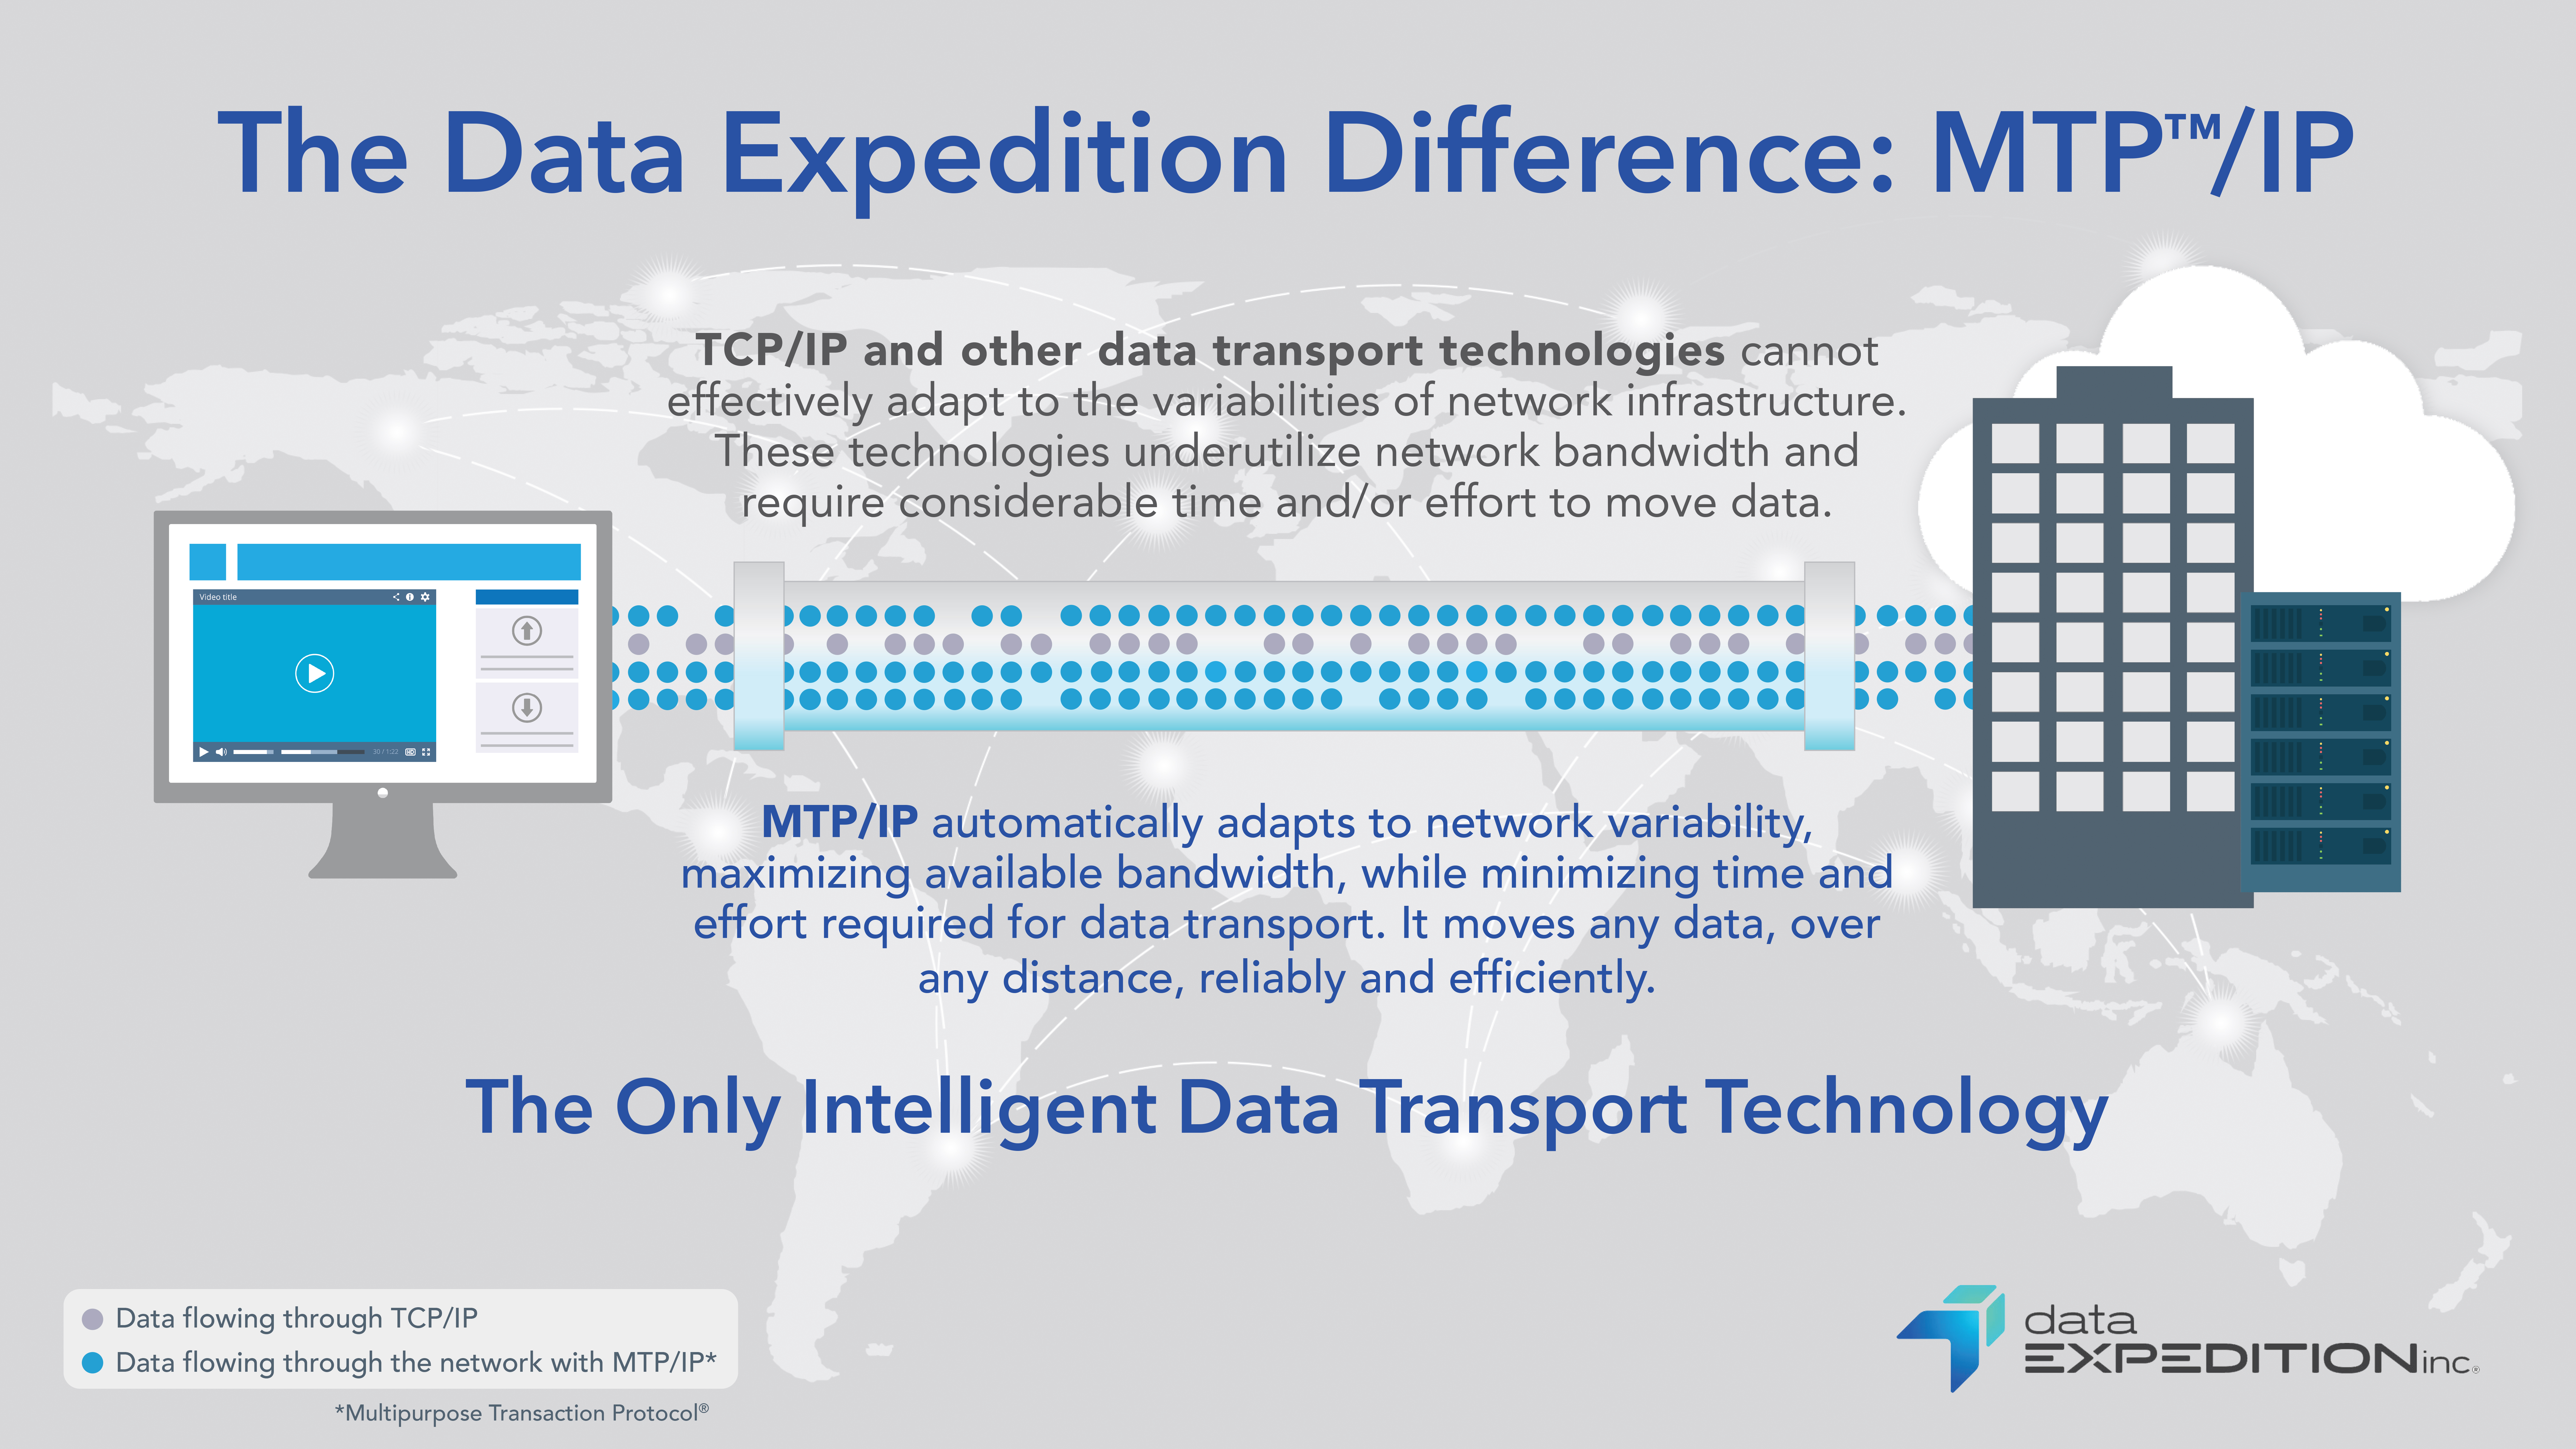 The Data Expedition Difference: MTP/IP (graphic)